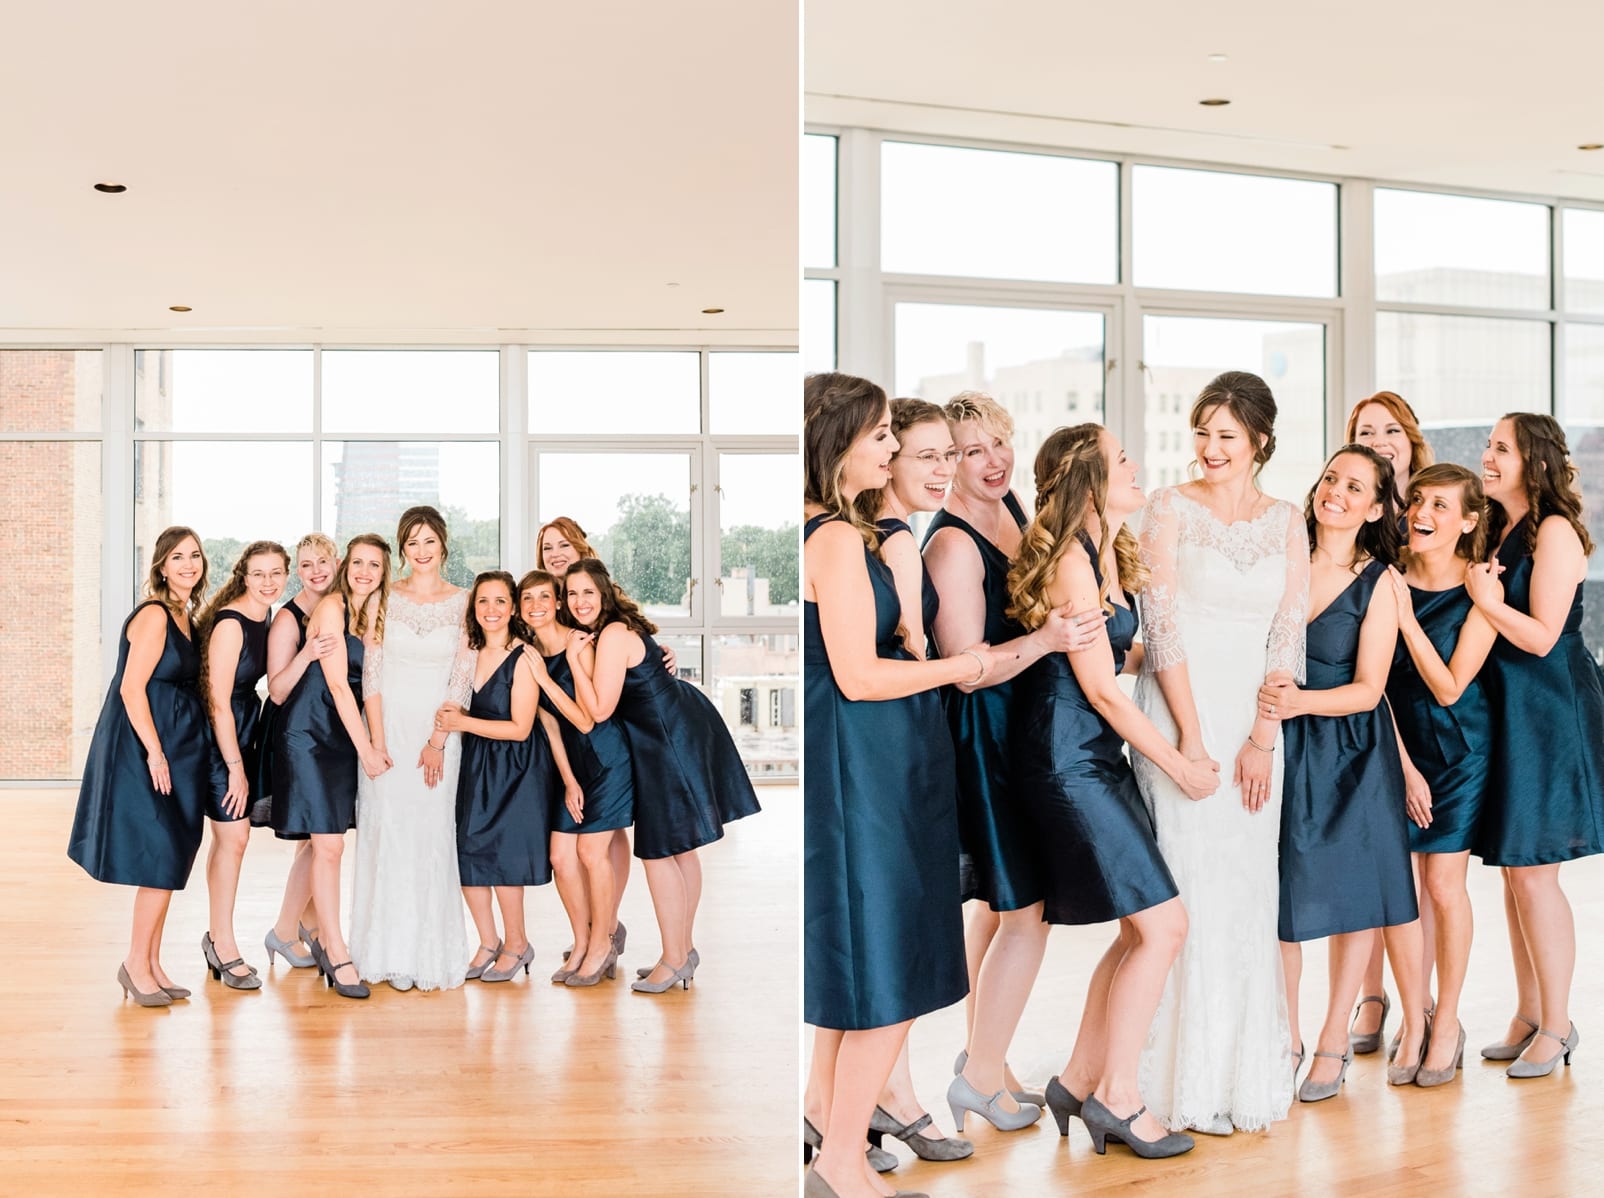 The Glass Box bride in a long lace gown laughing with her bridesmaids photo